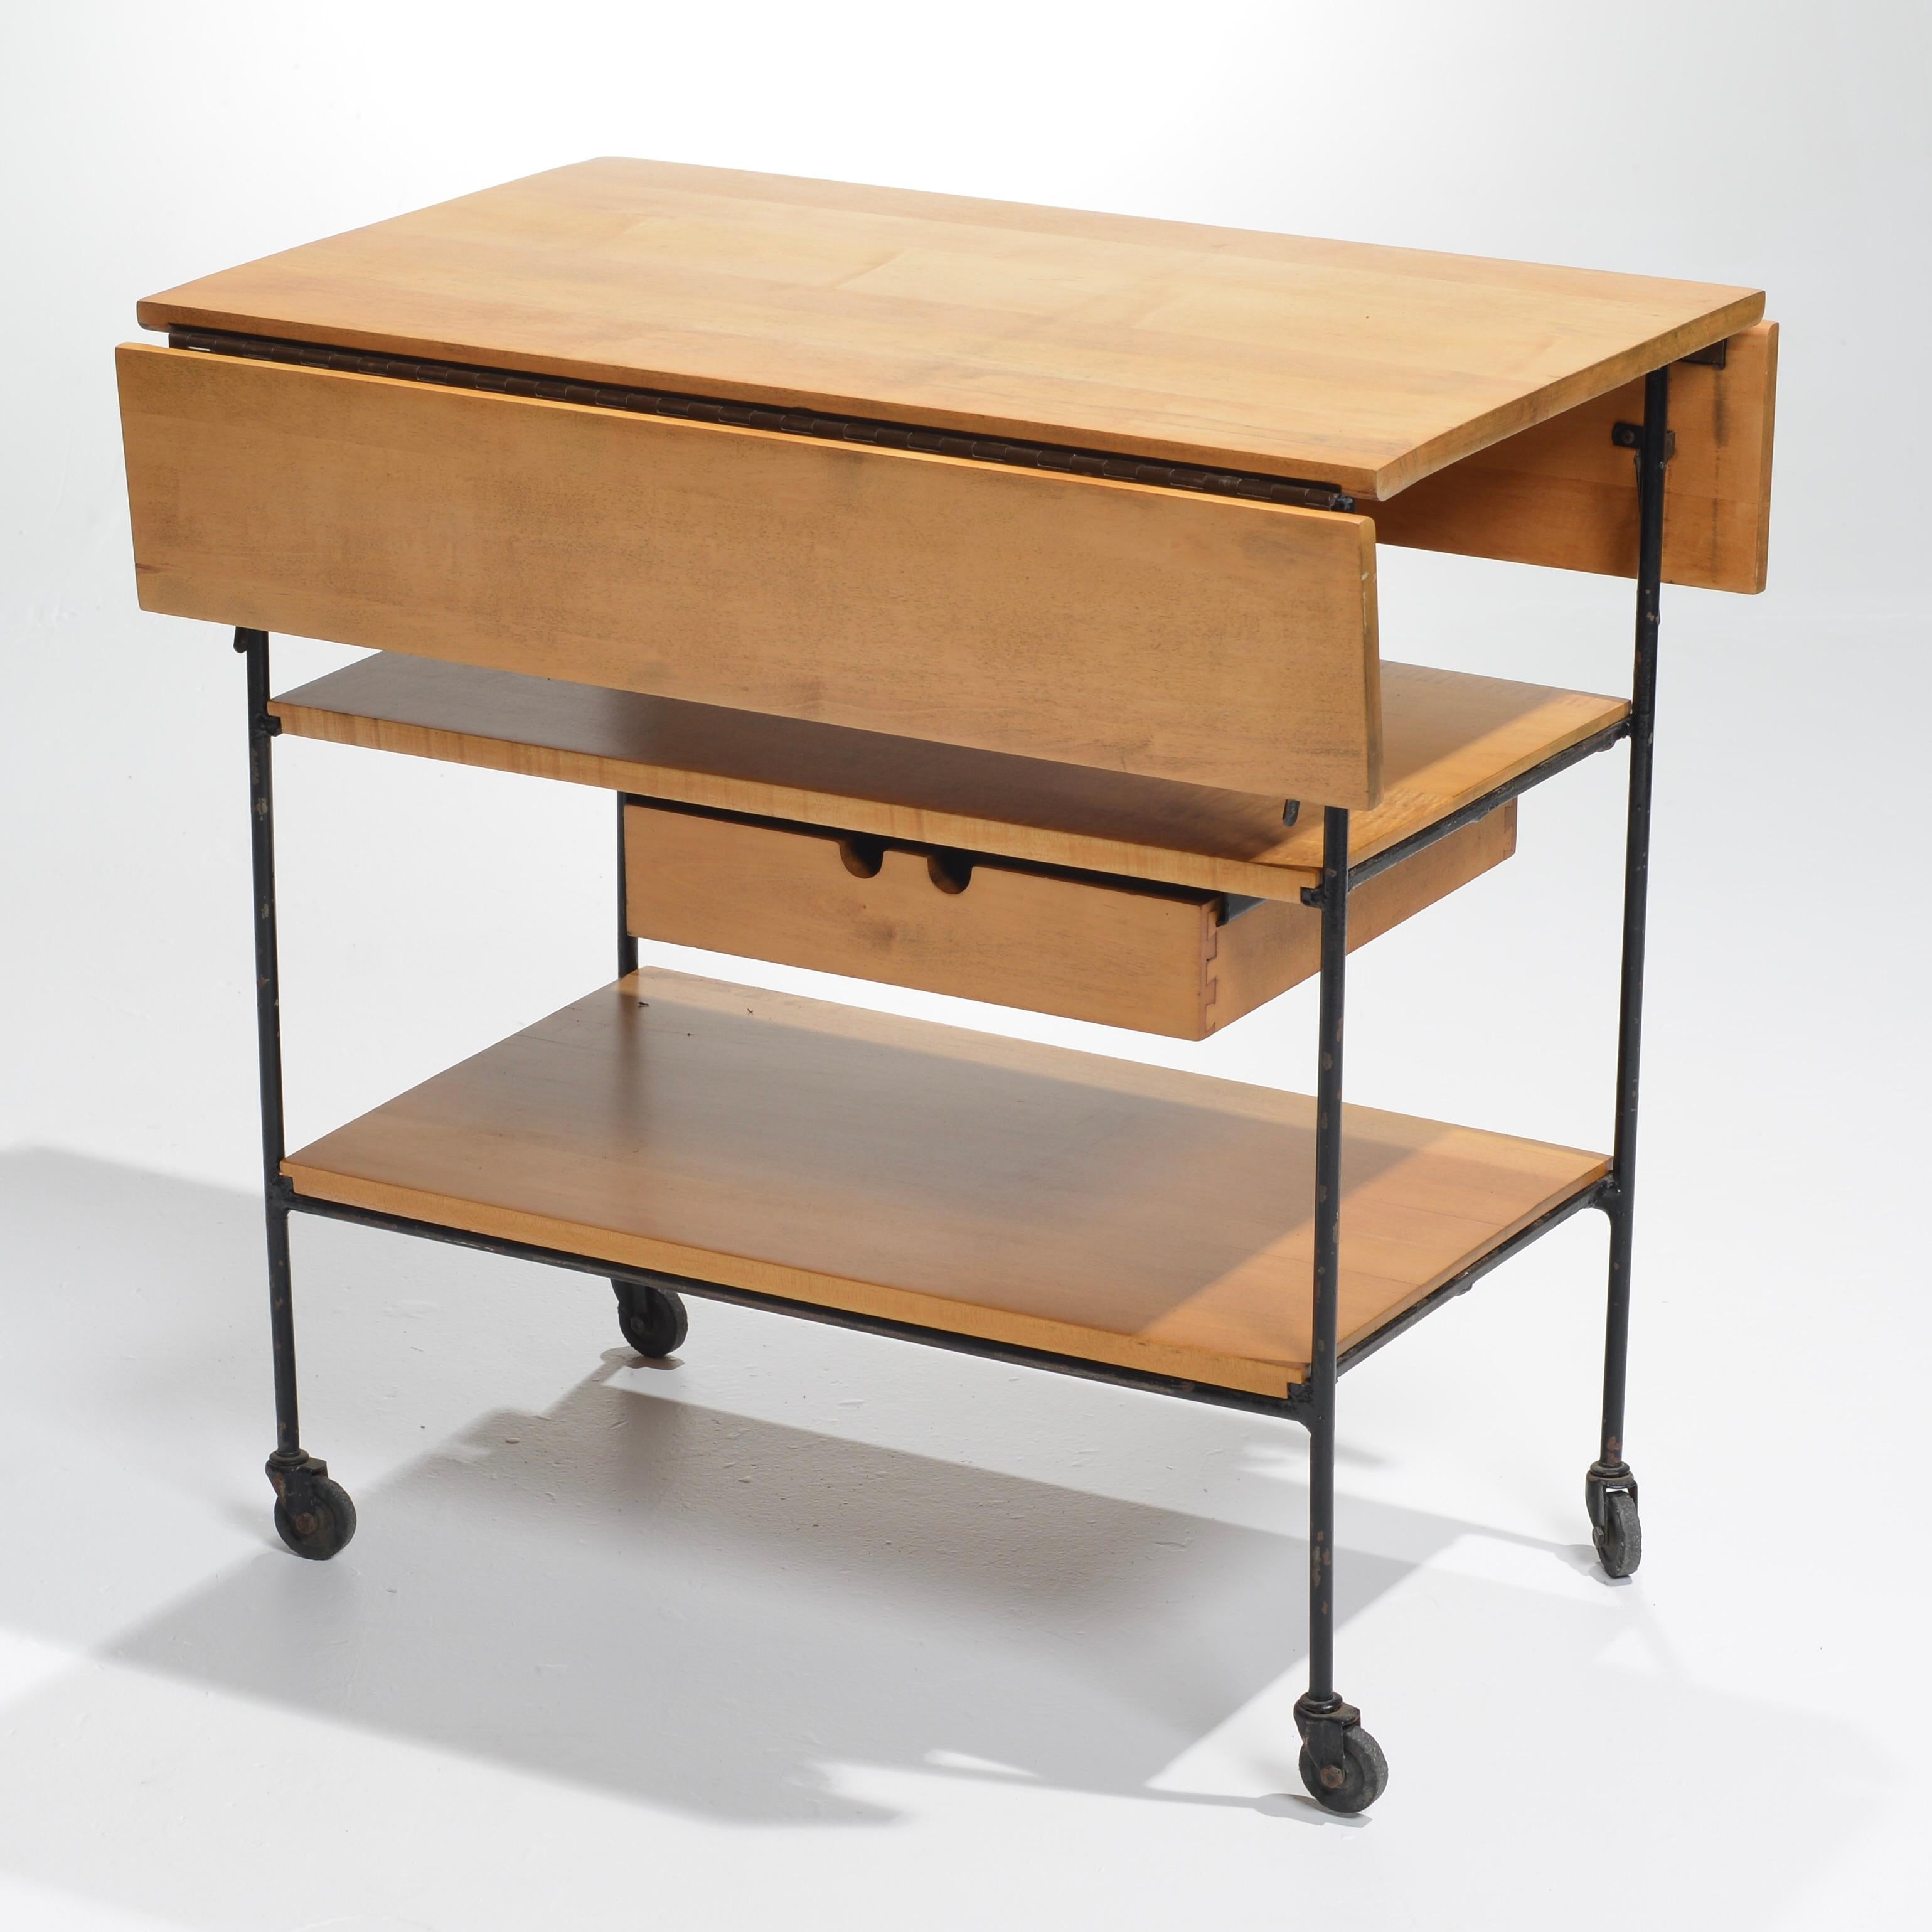 Rare Midcentury bar cart #1250 designed by Paul McCobb for planner group collection, circa 1950. Featuring one drawer and 2 fold down leaves. Original Wax mark on bottom. 
Fully Open 26